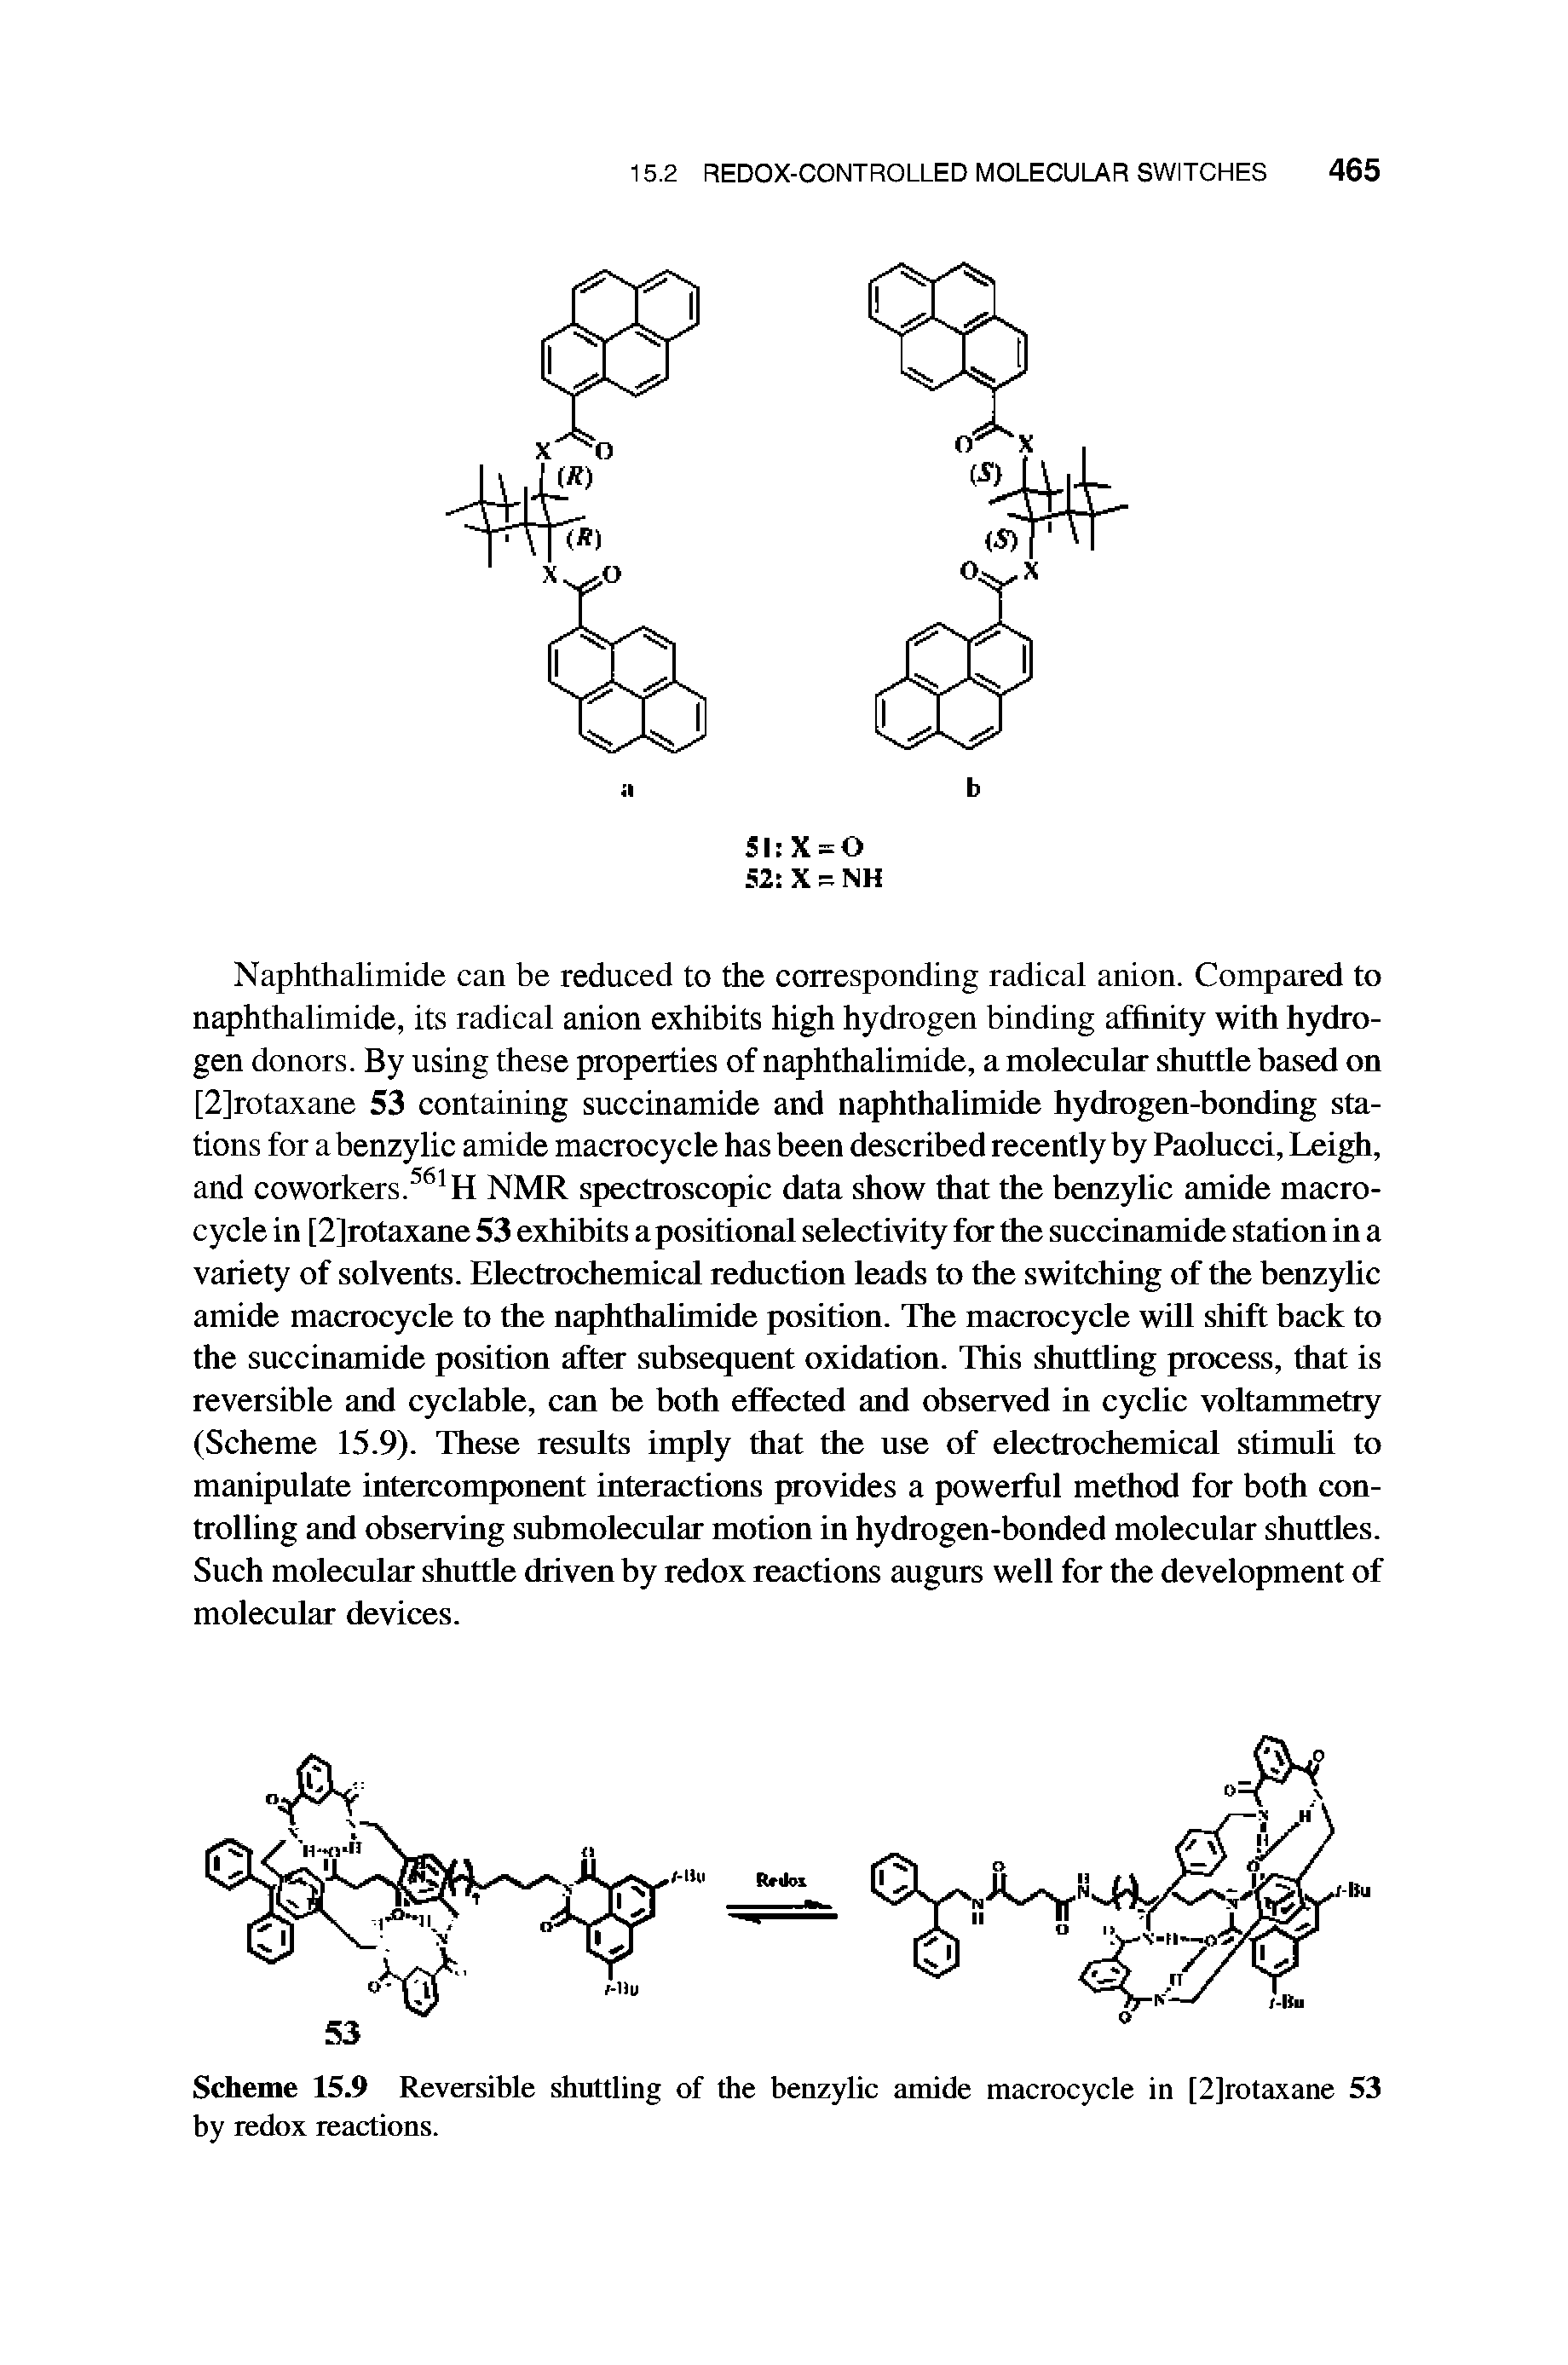 Scheme 15.9 Reversible shuttling of the benzylic amide macrocycle in [2]rotaxane 53 by redox reactions.